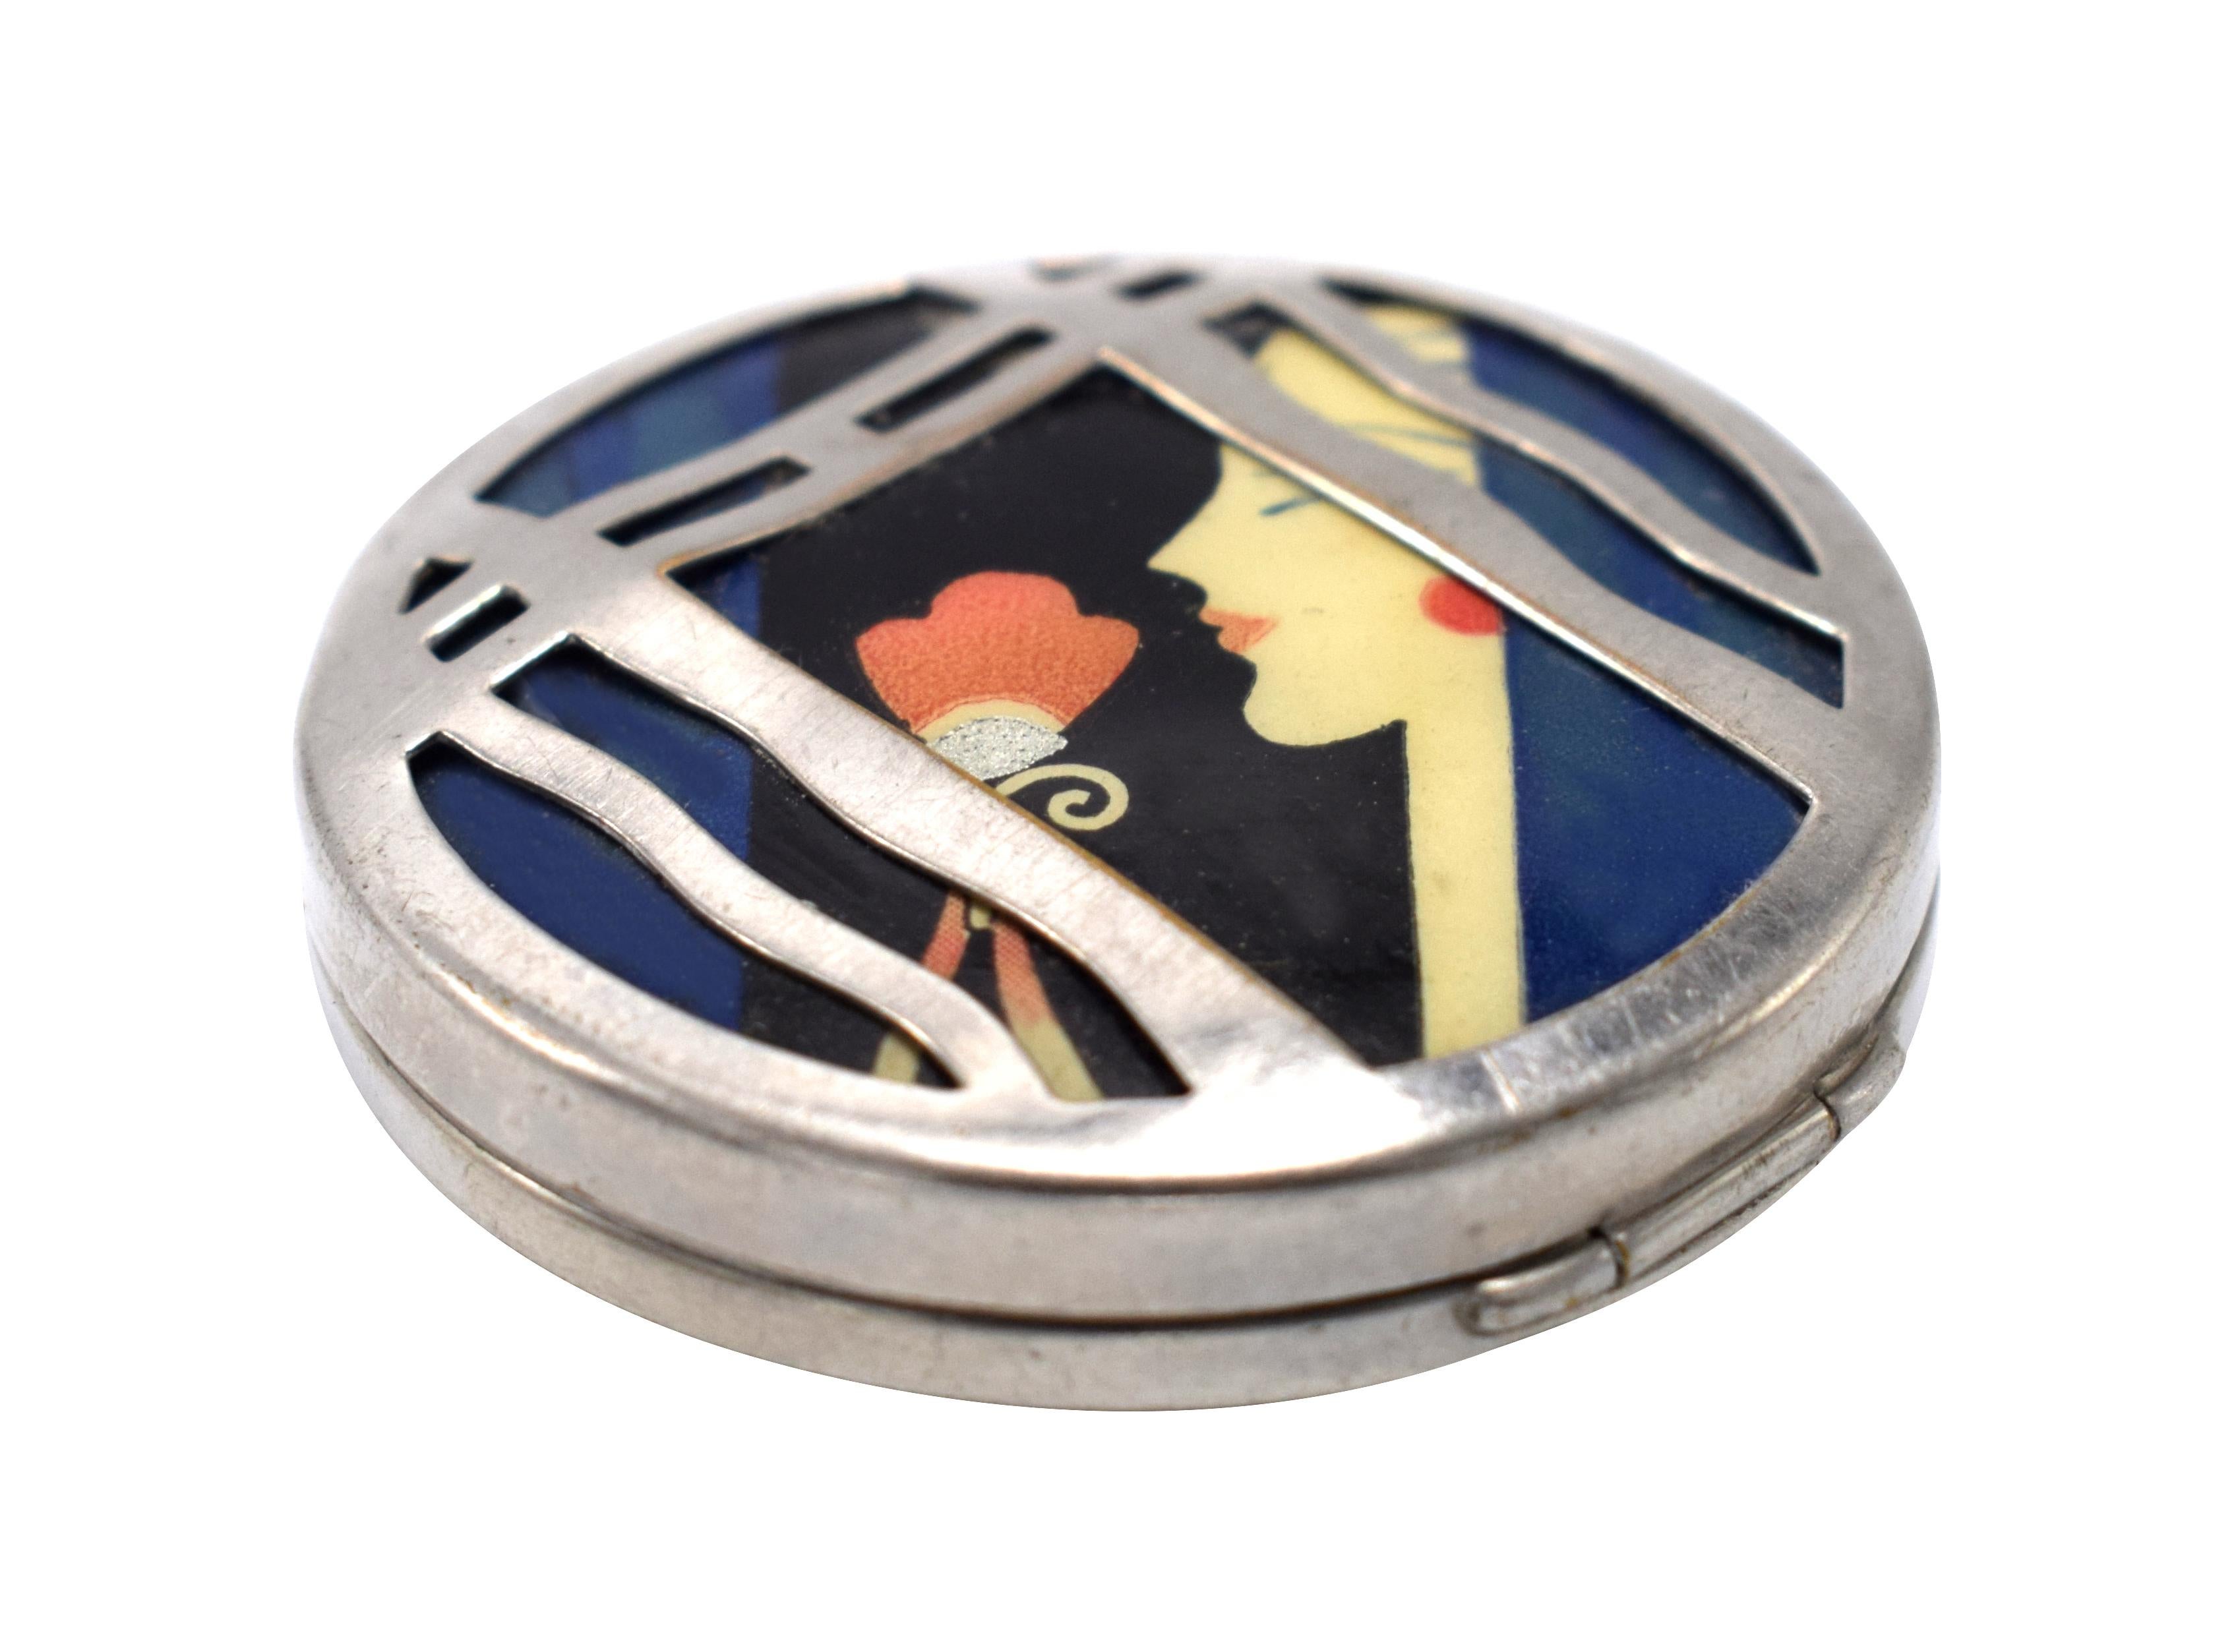 This has to be one of the most iconic of the Art Deco Ladies Powder compacts. This particular compact was made by the Woodworth Manufacturing Company in 1929 for the Karess line. A truly attractive Art Deco ladies compact in chromium plate with